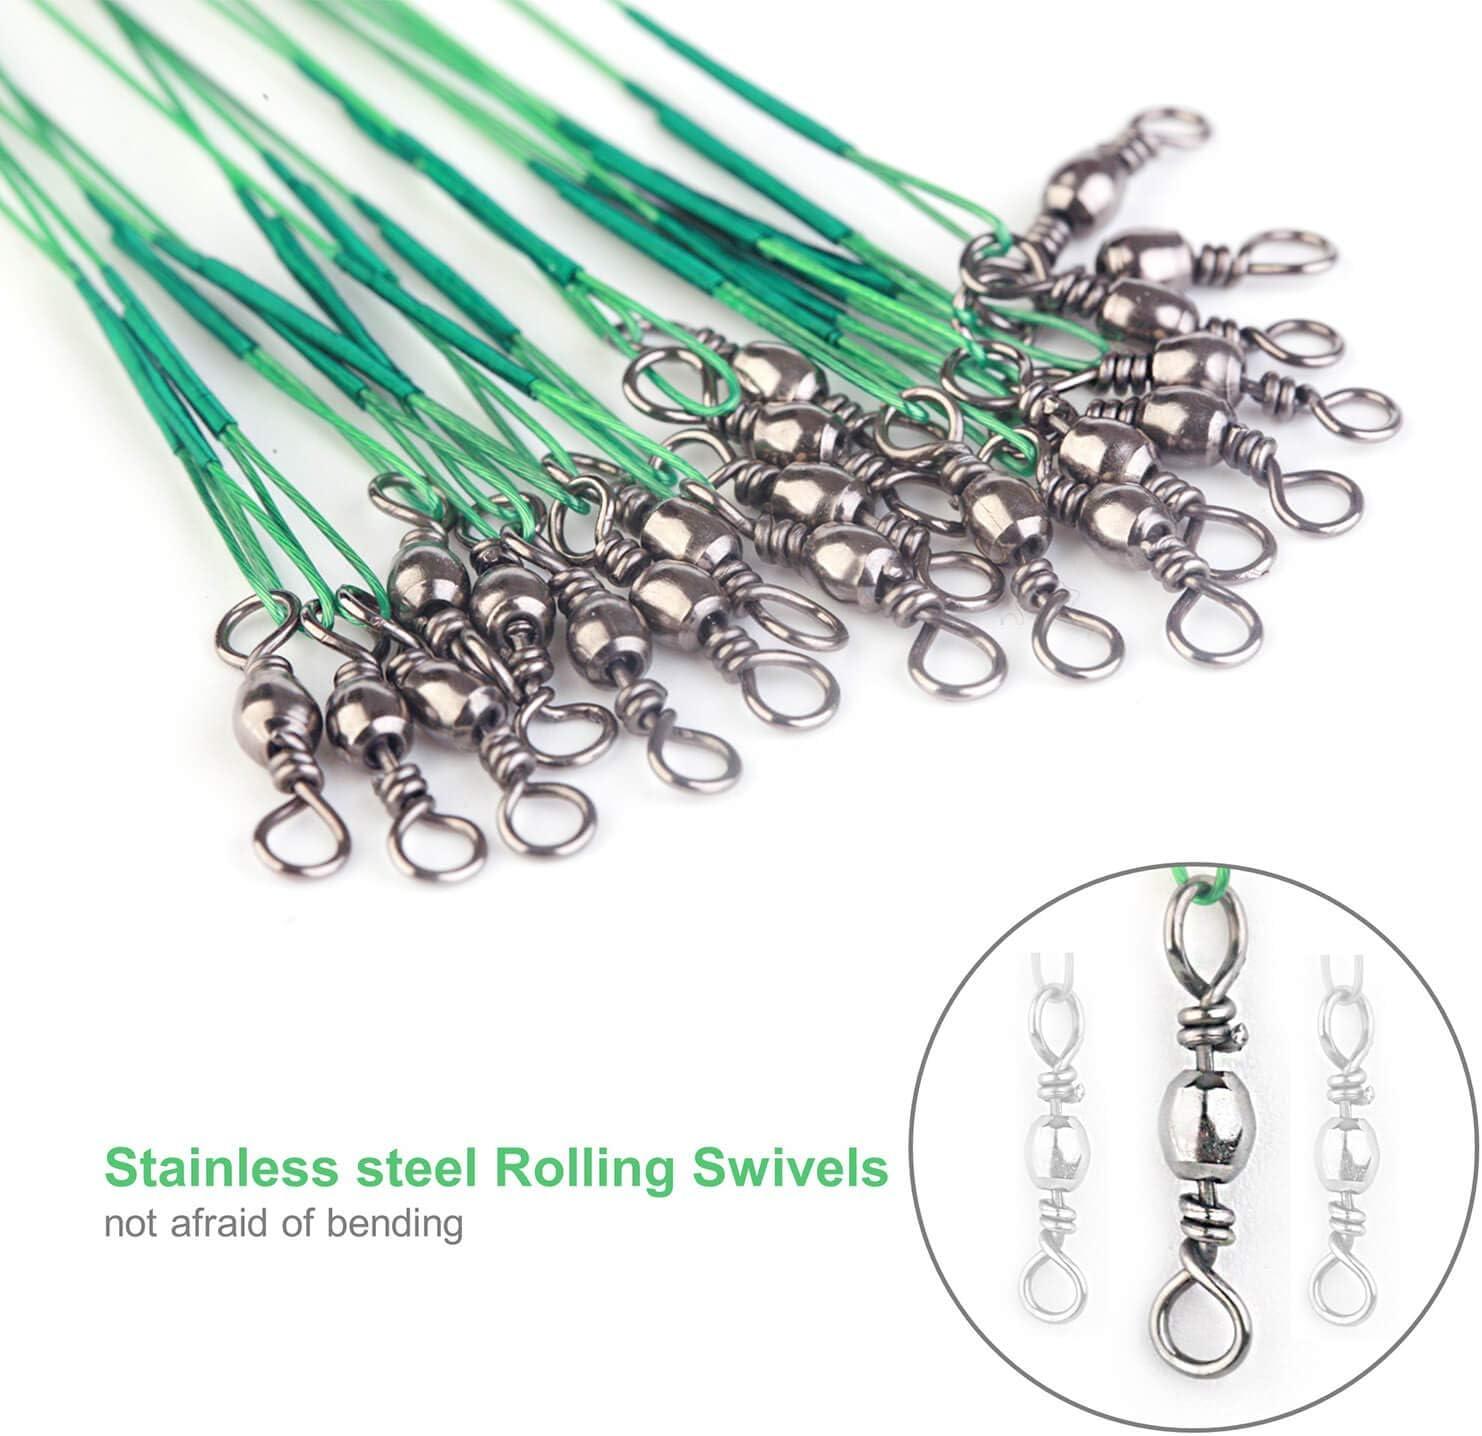 60pcs Stainless Steel Fishing Wire Leaders Rigs with Snaps Swivels